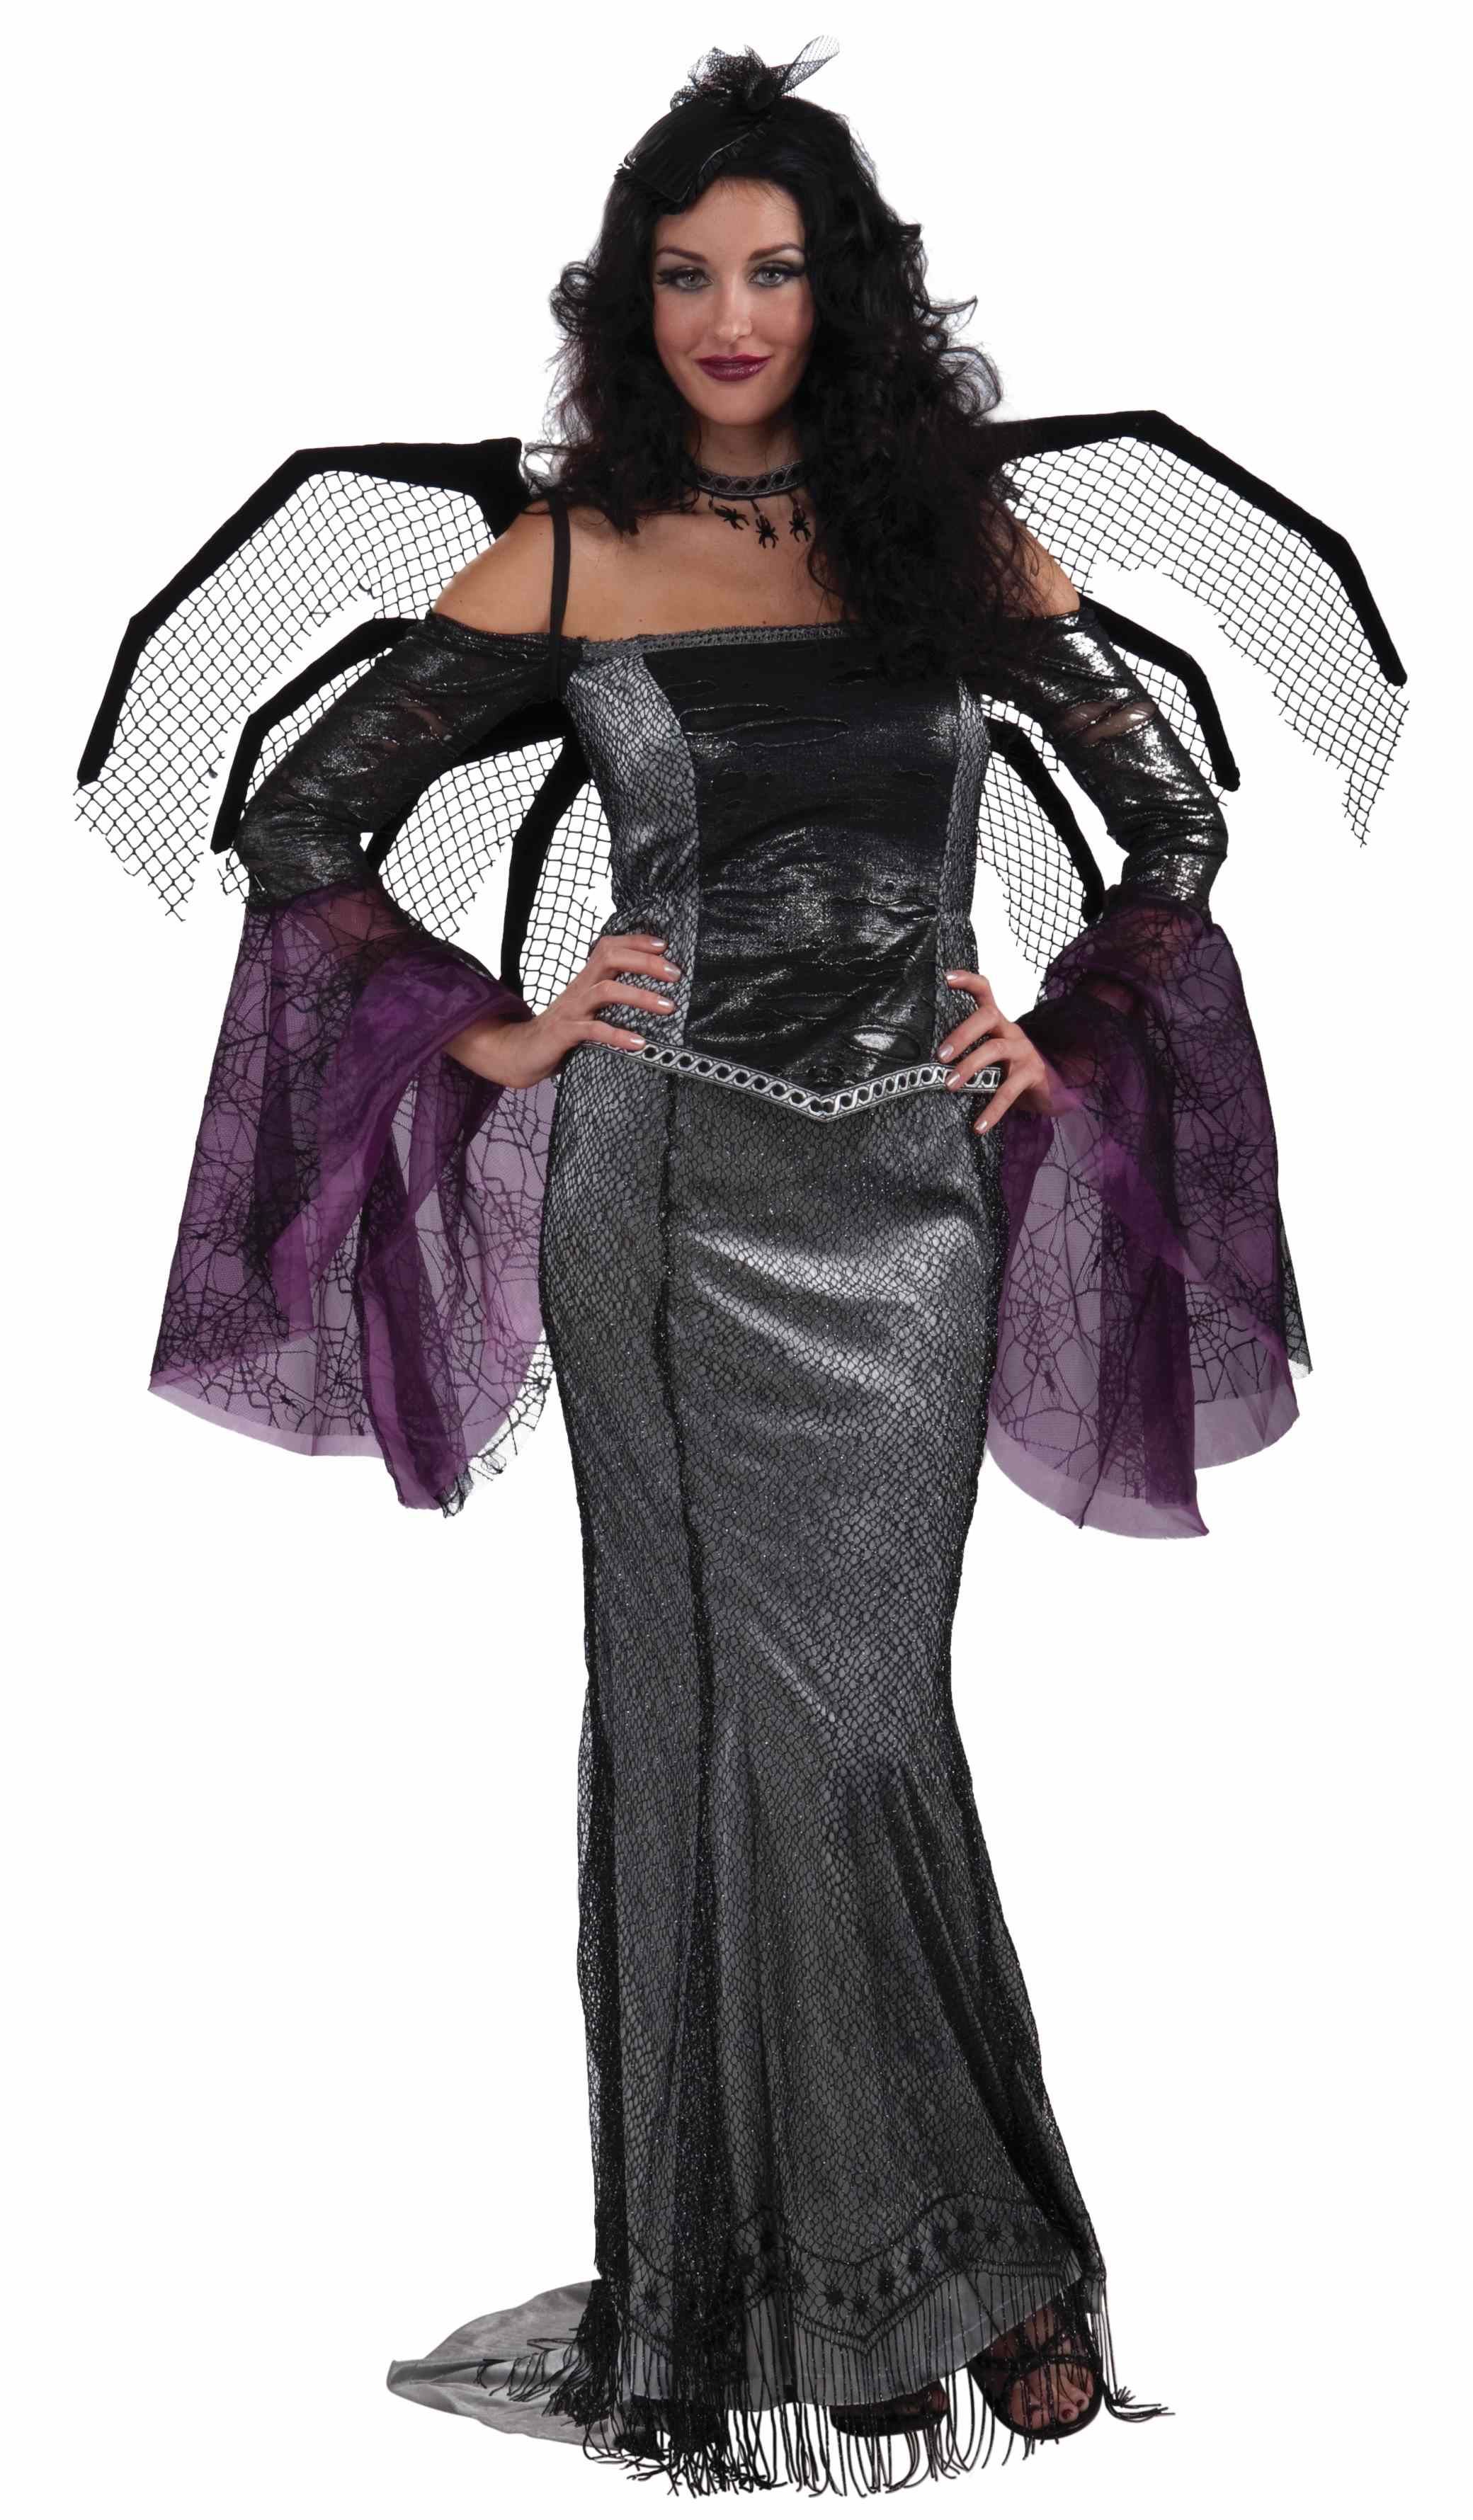 Adult Deluxe Wicked Widow Costume | $45.99 | The Costume Land